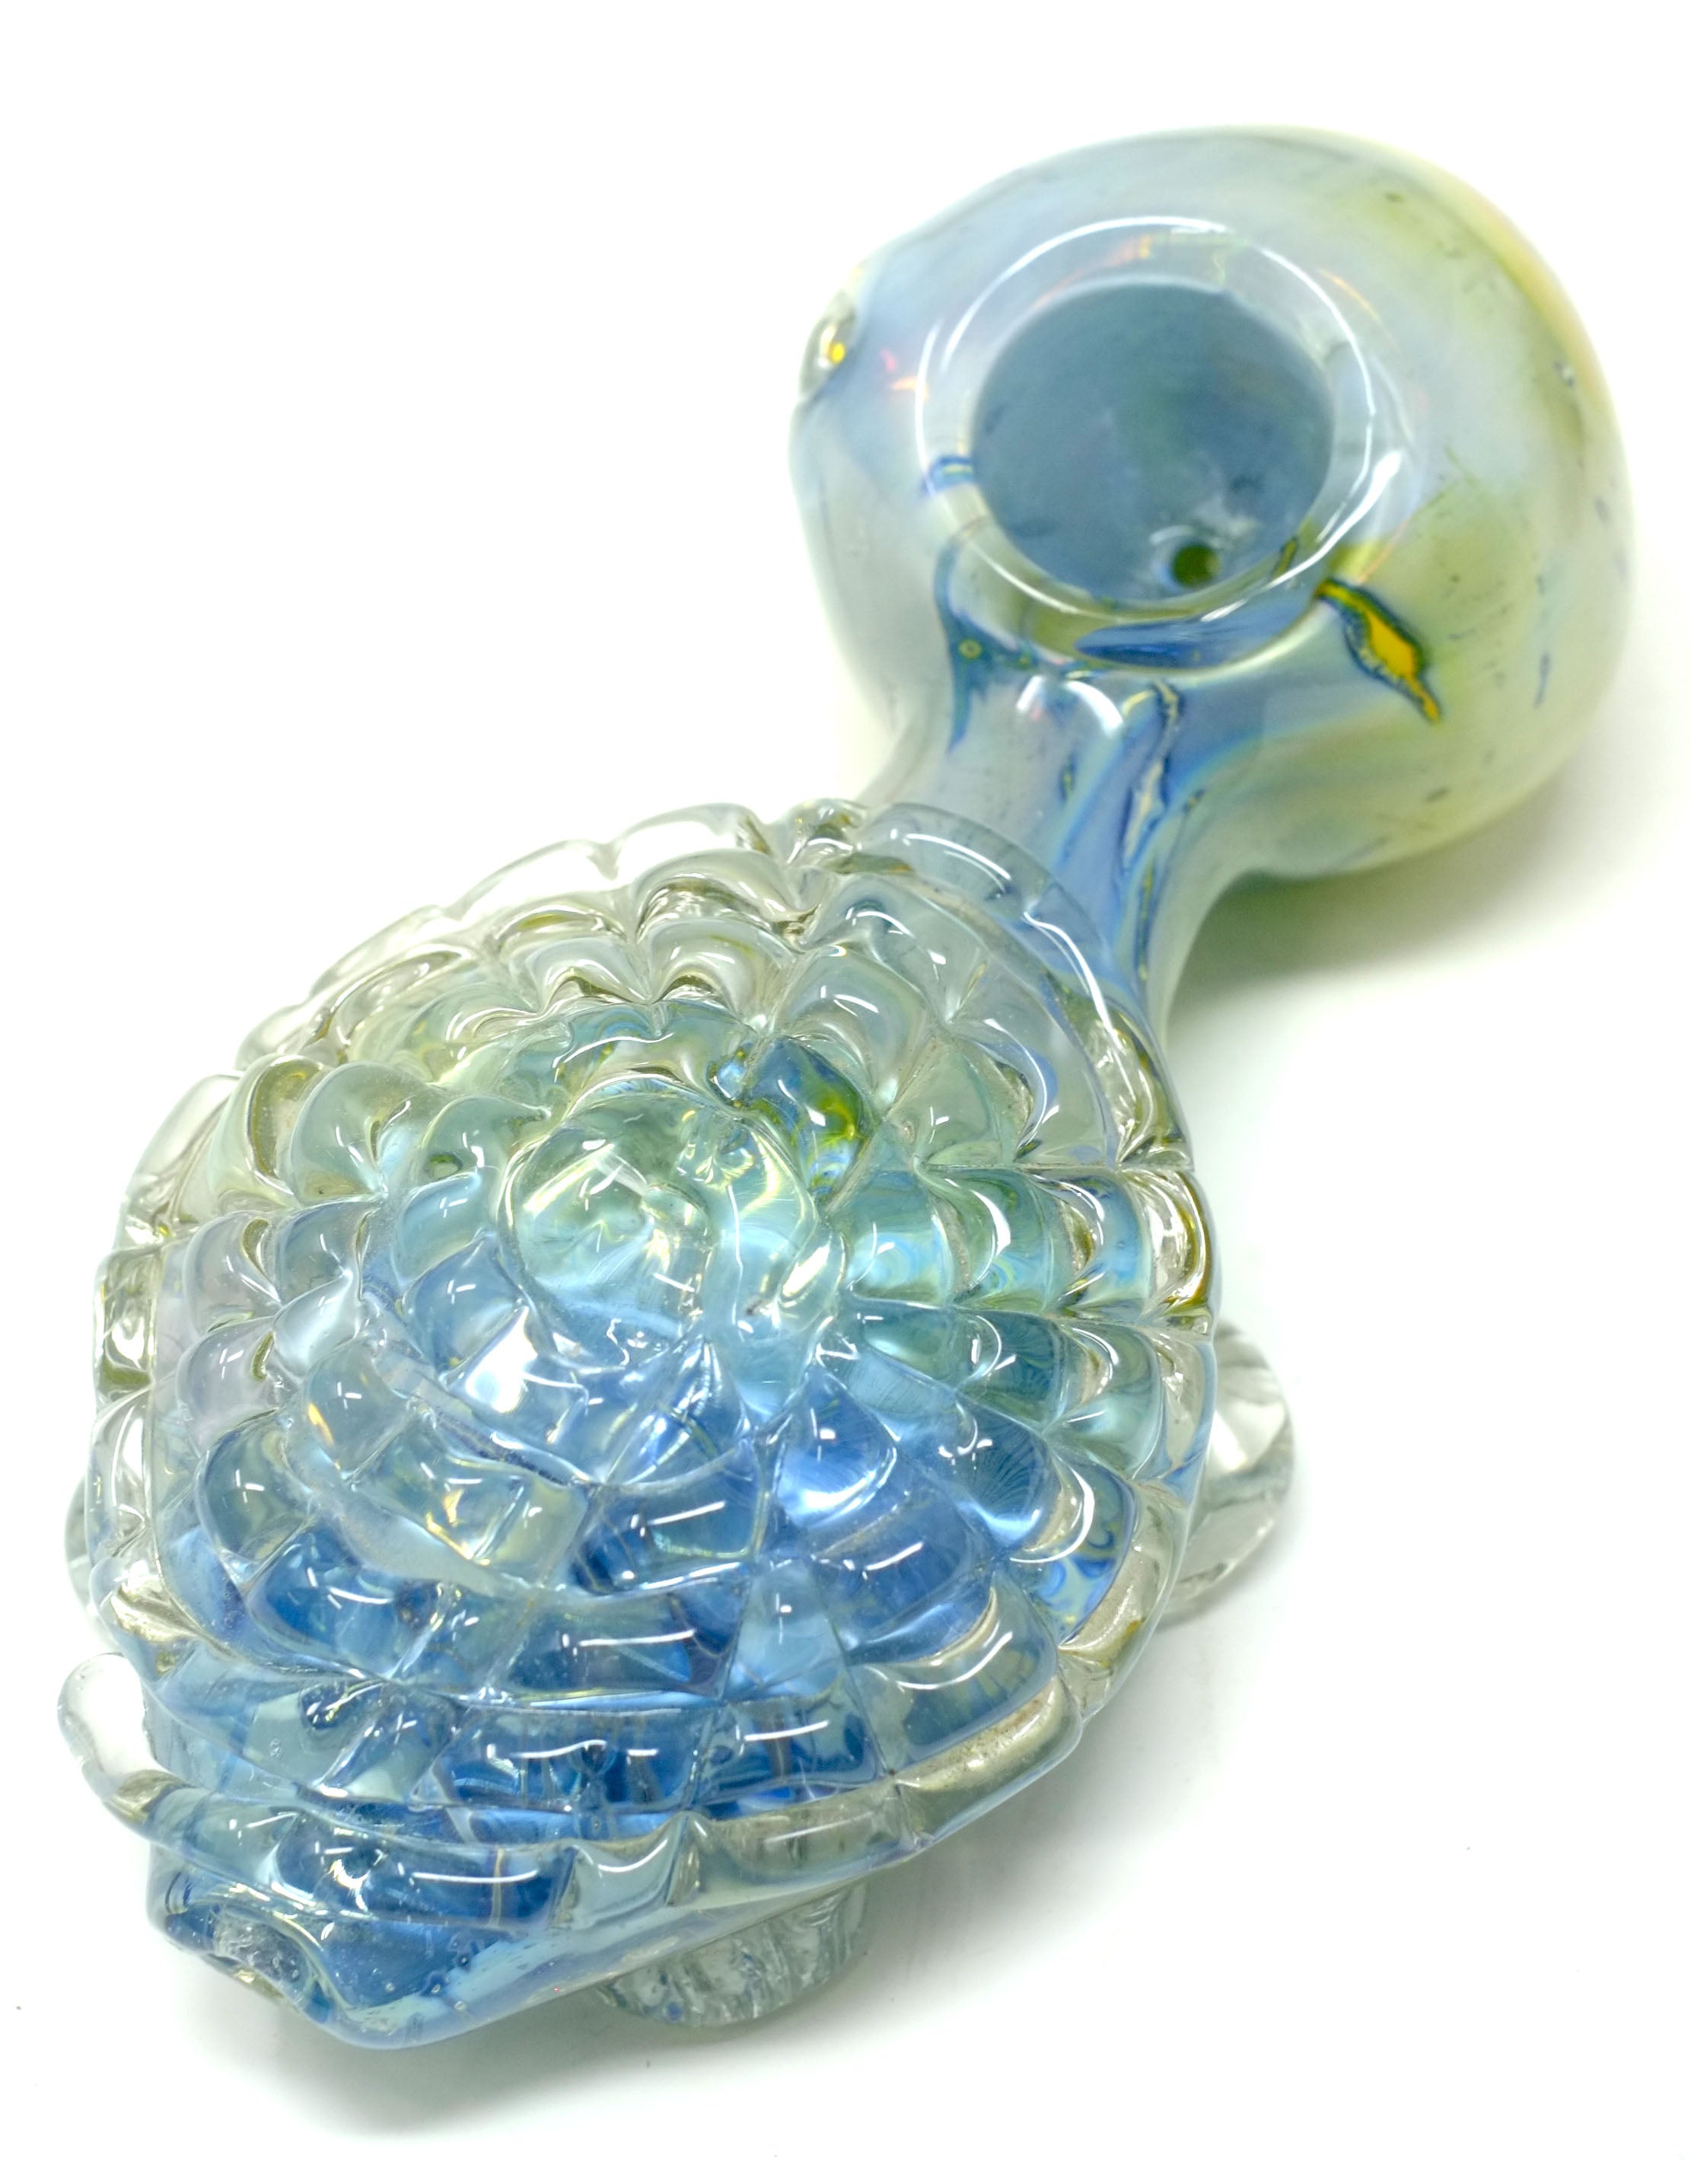 Glass Smoking Pipes, Spoon Pipes, Weed Pipes